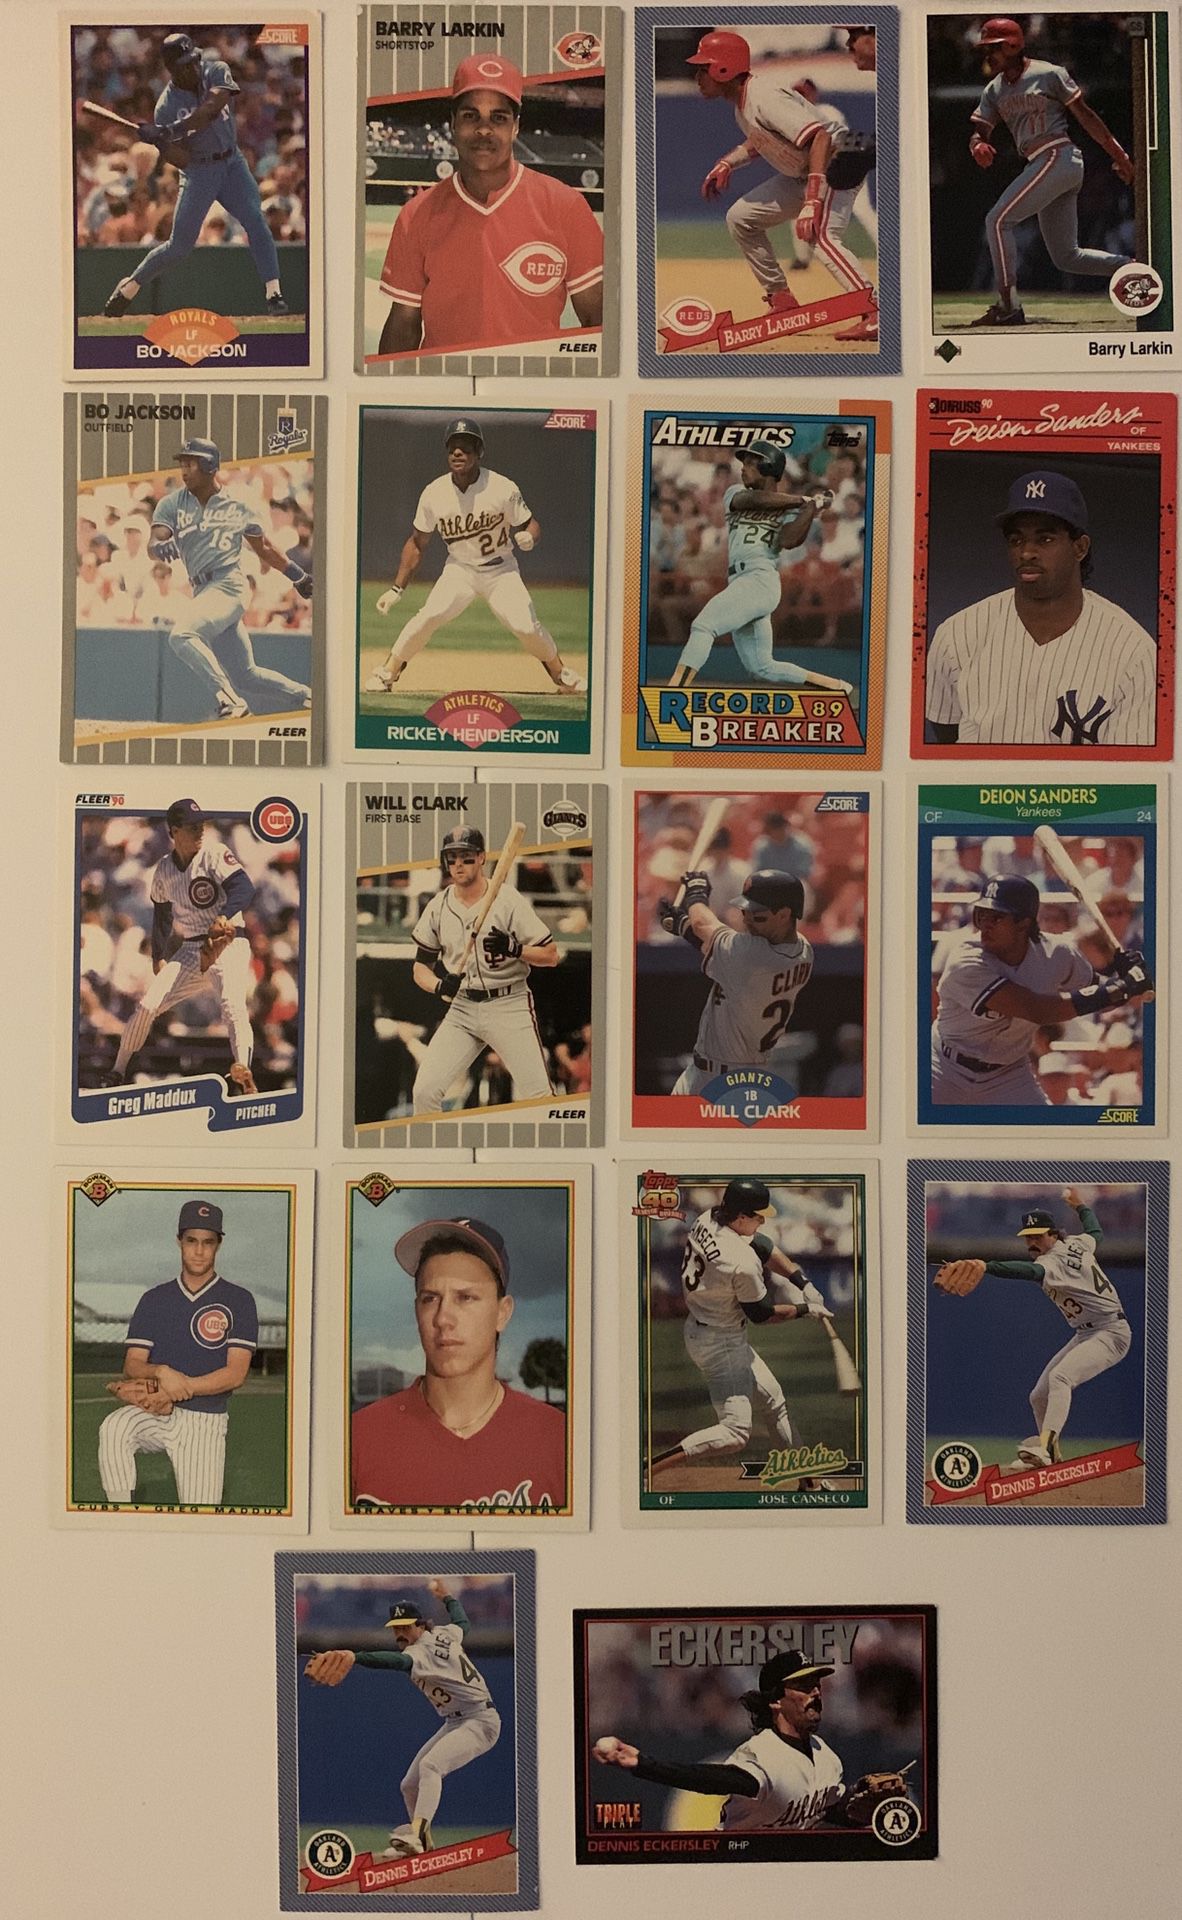 1980s-Early 1990s Baseball Cards- Valuable Players